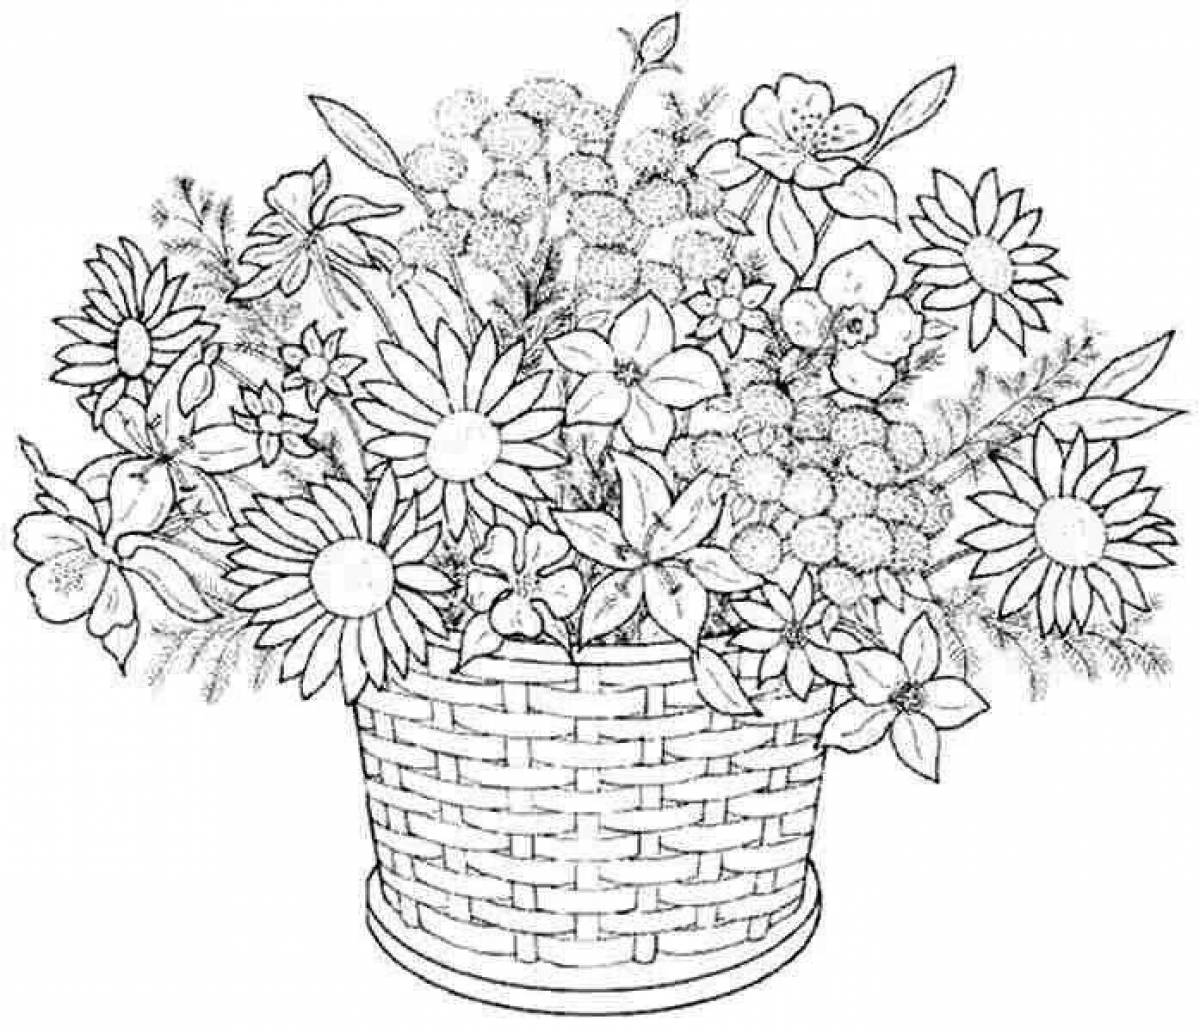 Coloring book amazing basket of flowers